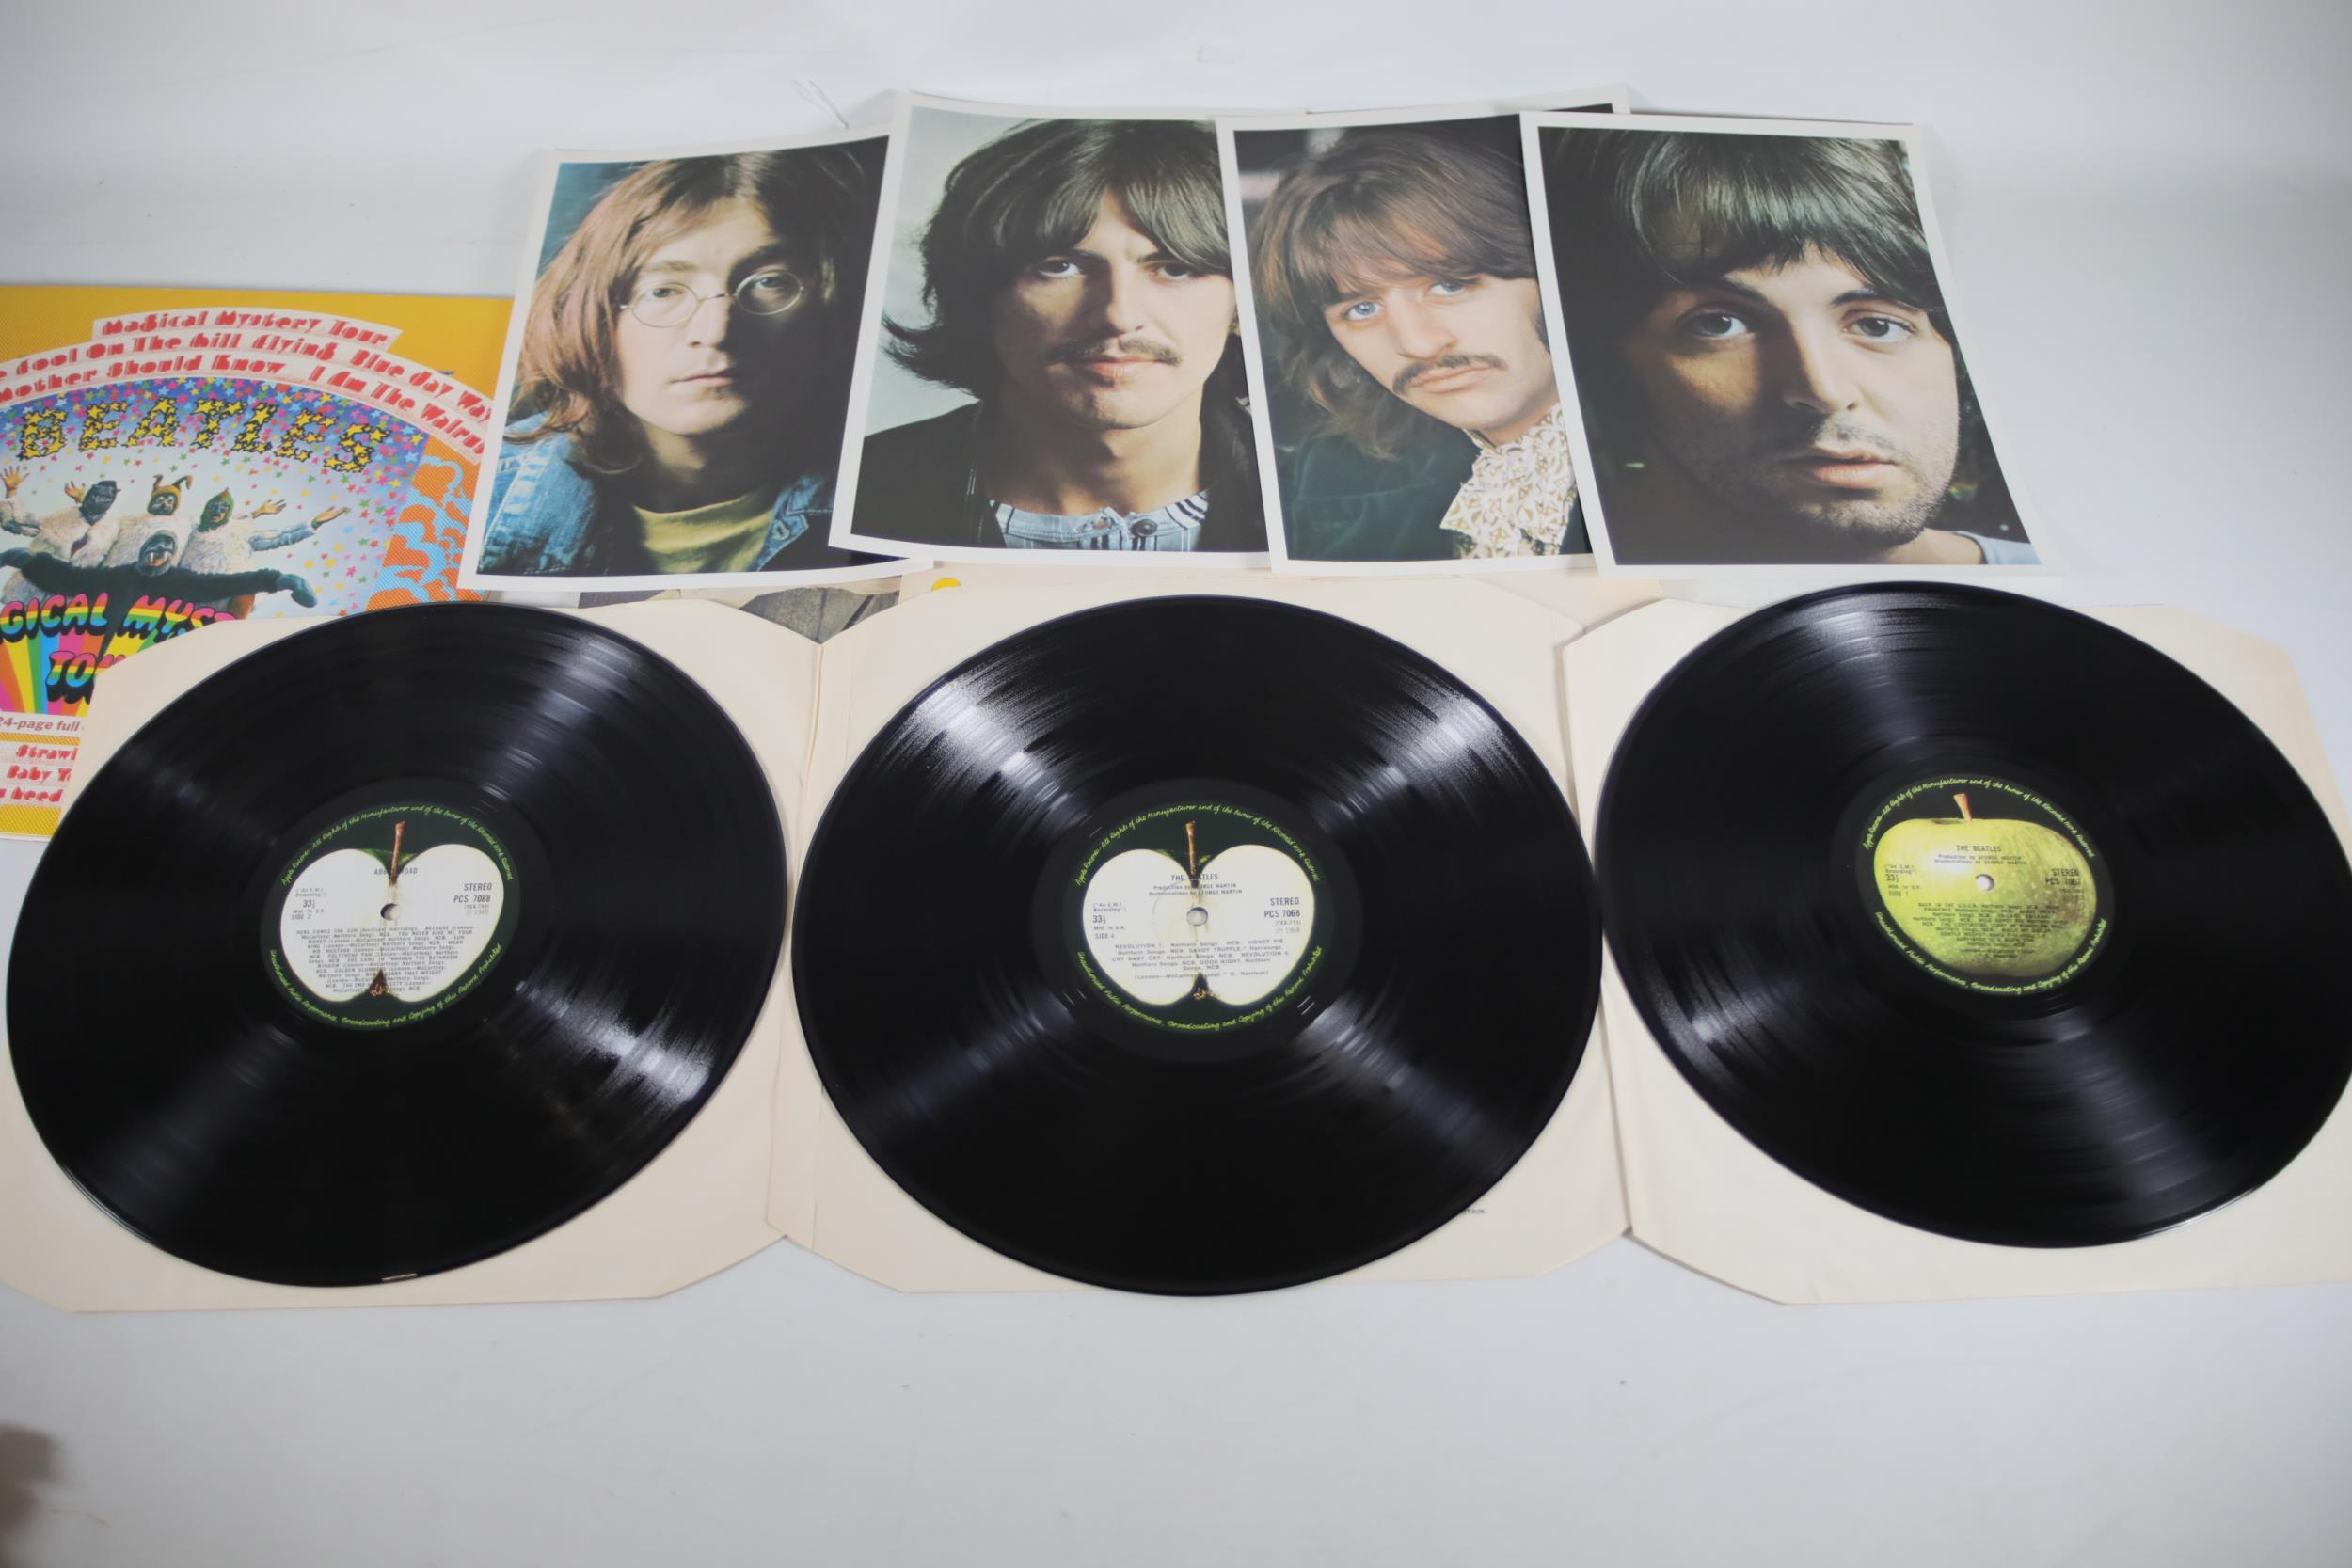 x4 The Beatles Vinyl LPs magical mystery tour sealed revolver album ect - Image 5 of 8